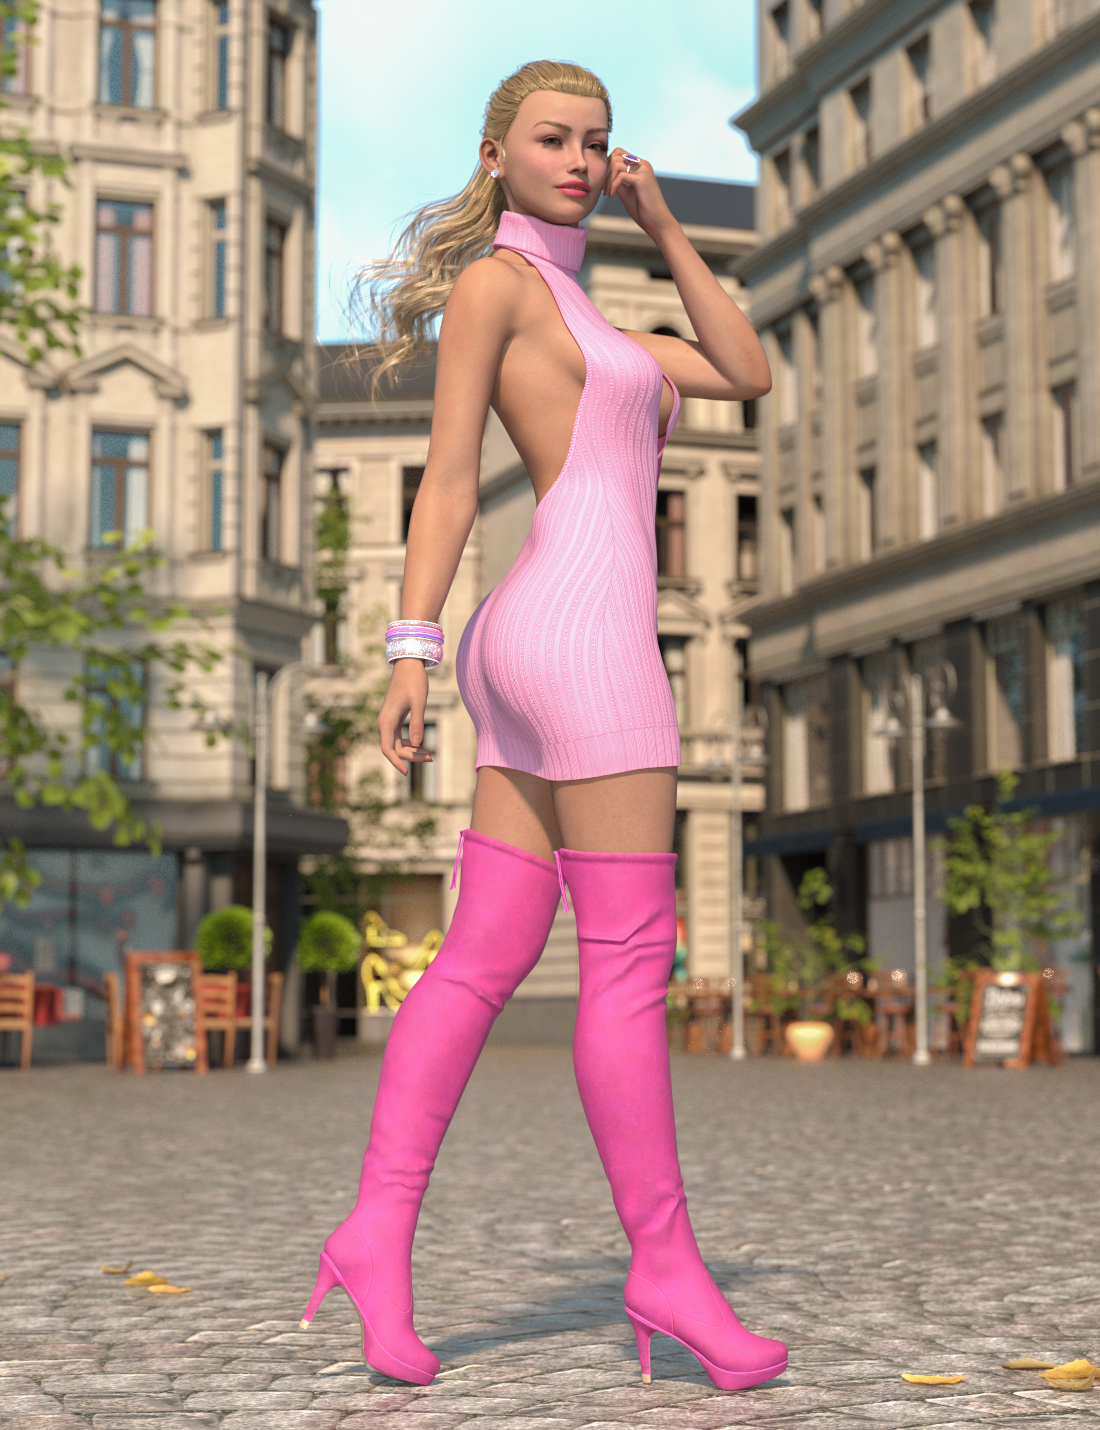 Simply Sexy dForce Outfit for Genesis 9 Base Feminine by: Blue Rabbit, 3D Models by Daz 3D